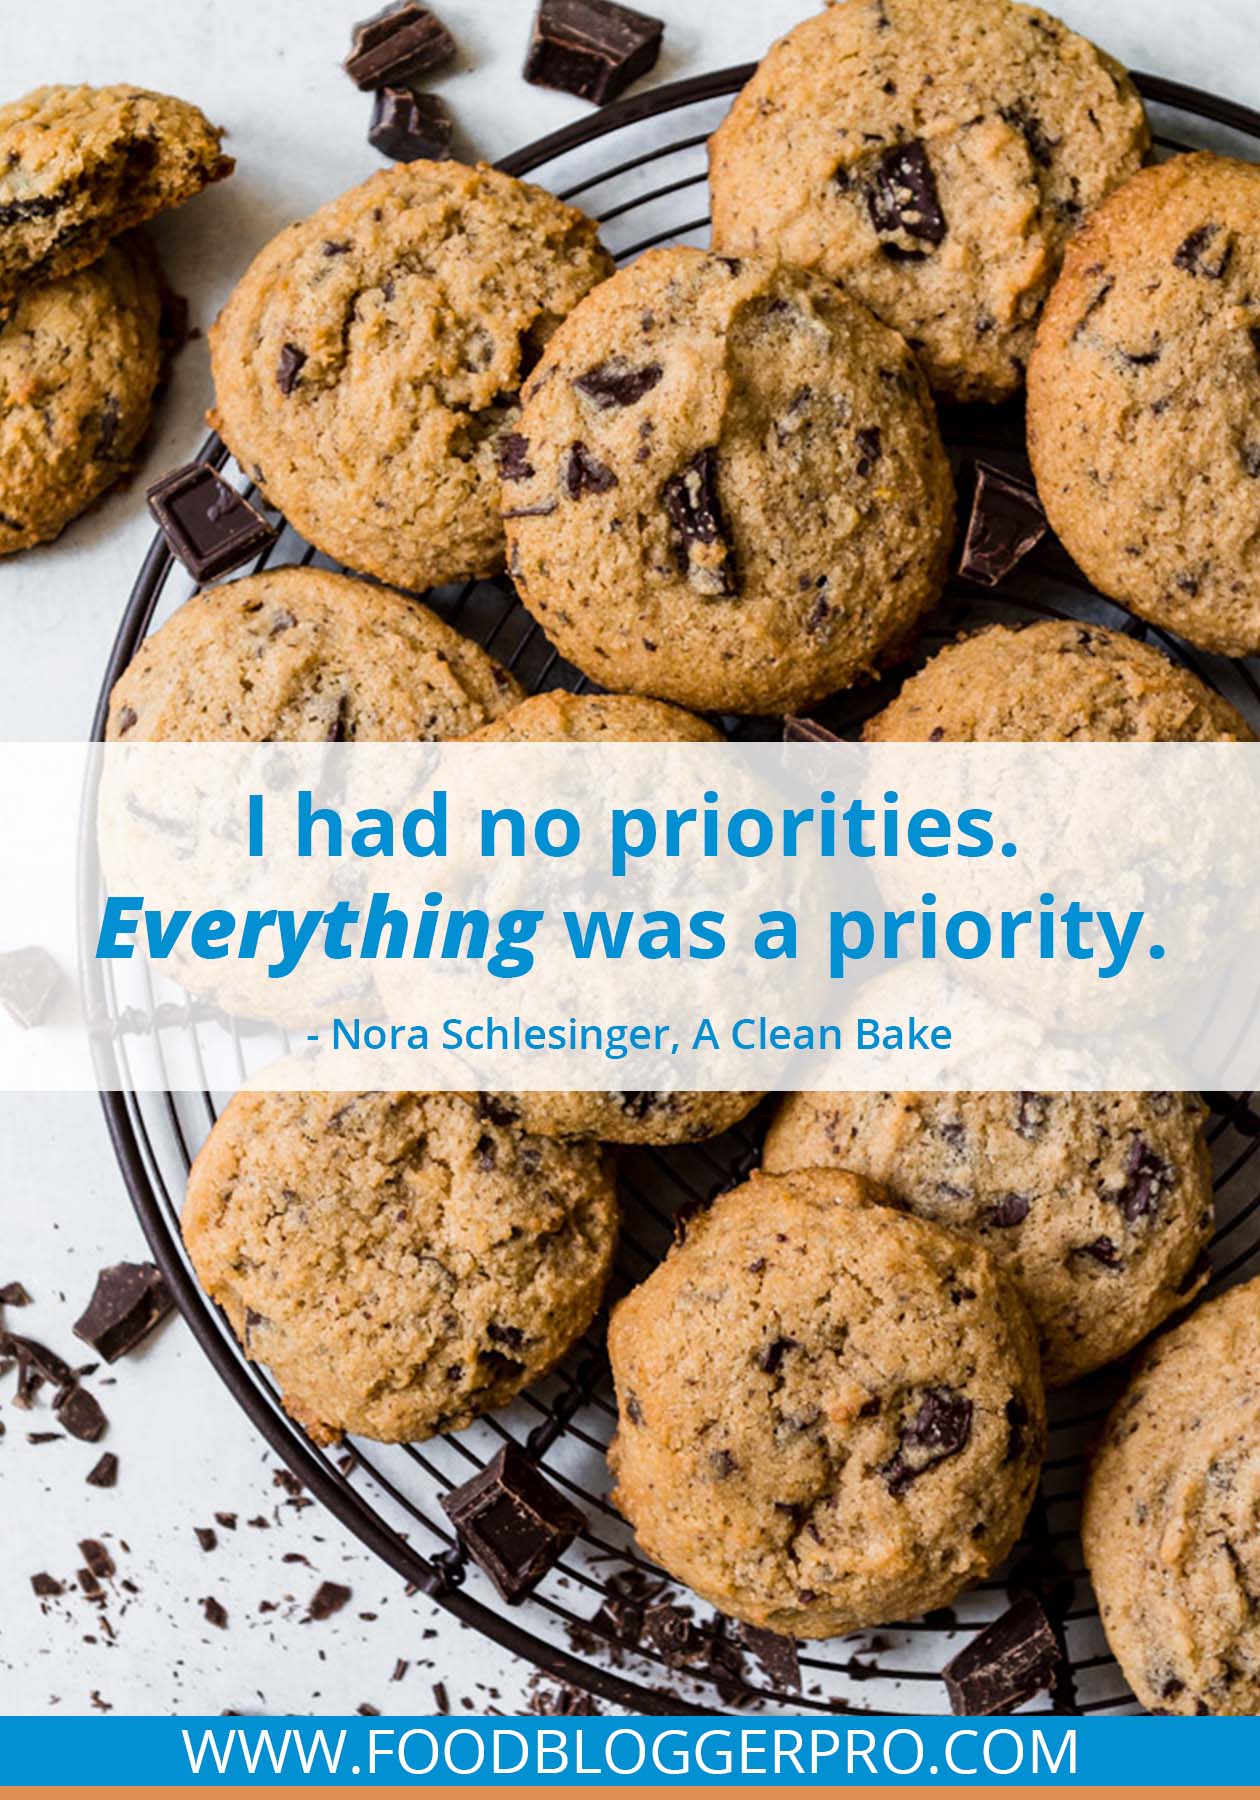 A quote from Nora Schlesinger’s appearance on the Food Blogger Pro podcast that says, 'I had no priorities. Everything was a priority.'